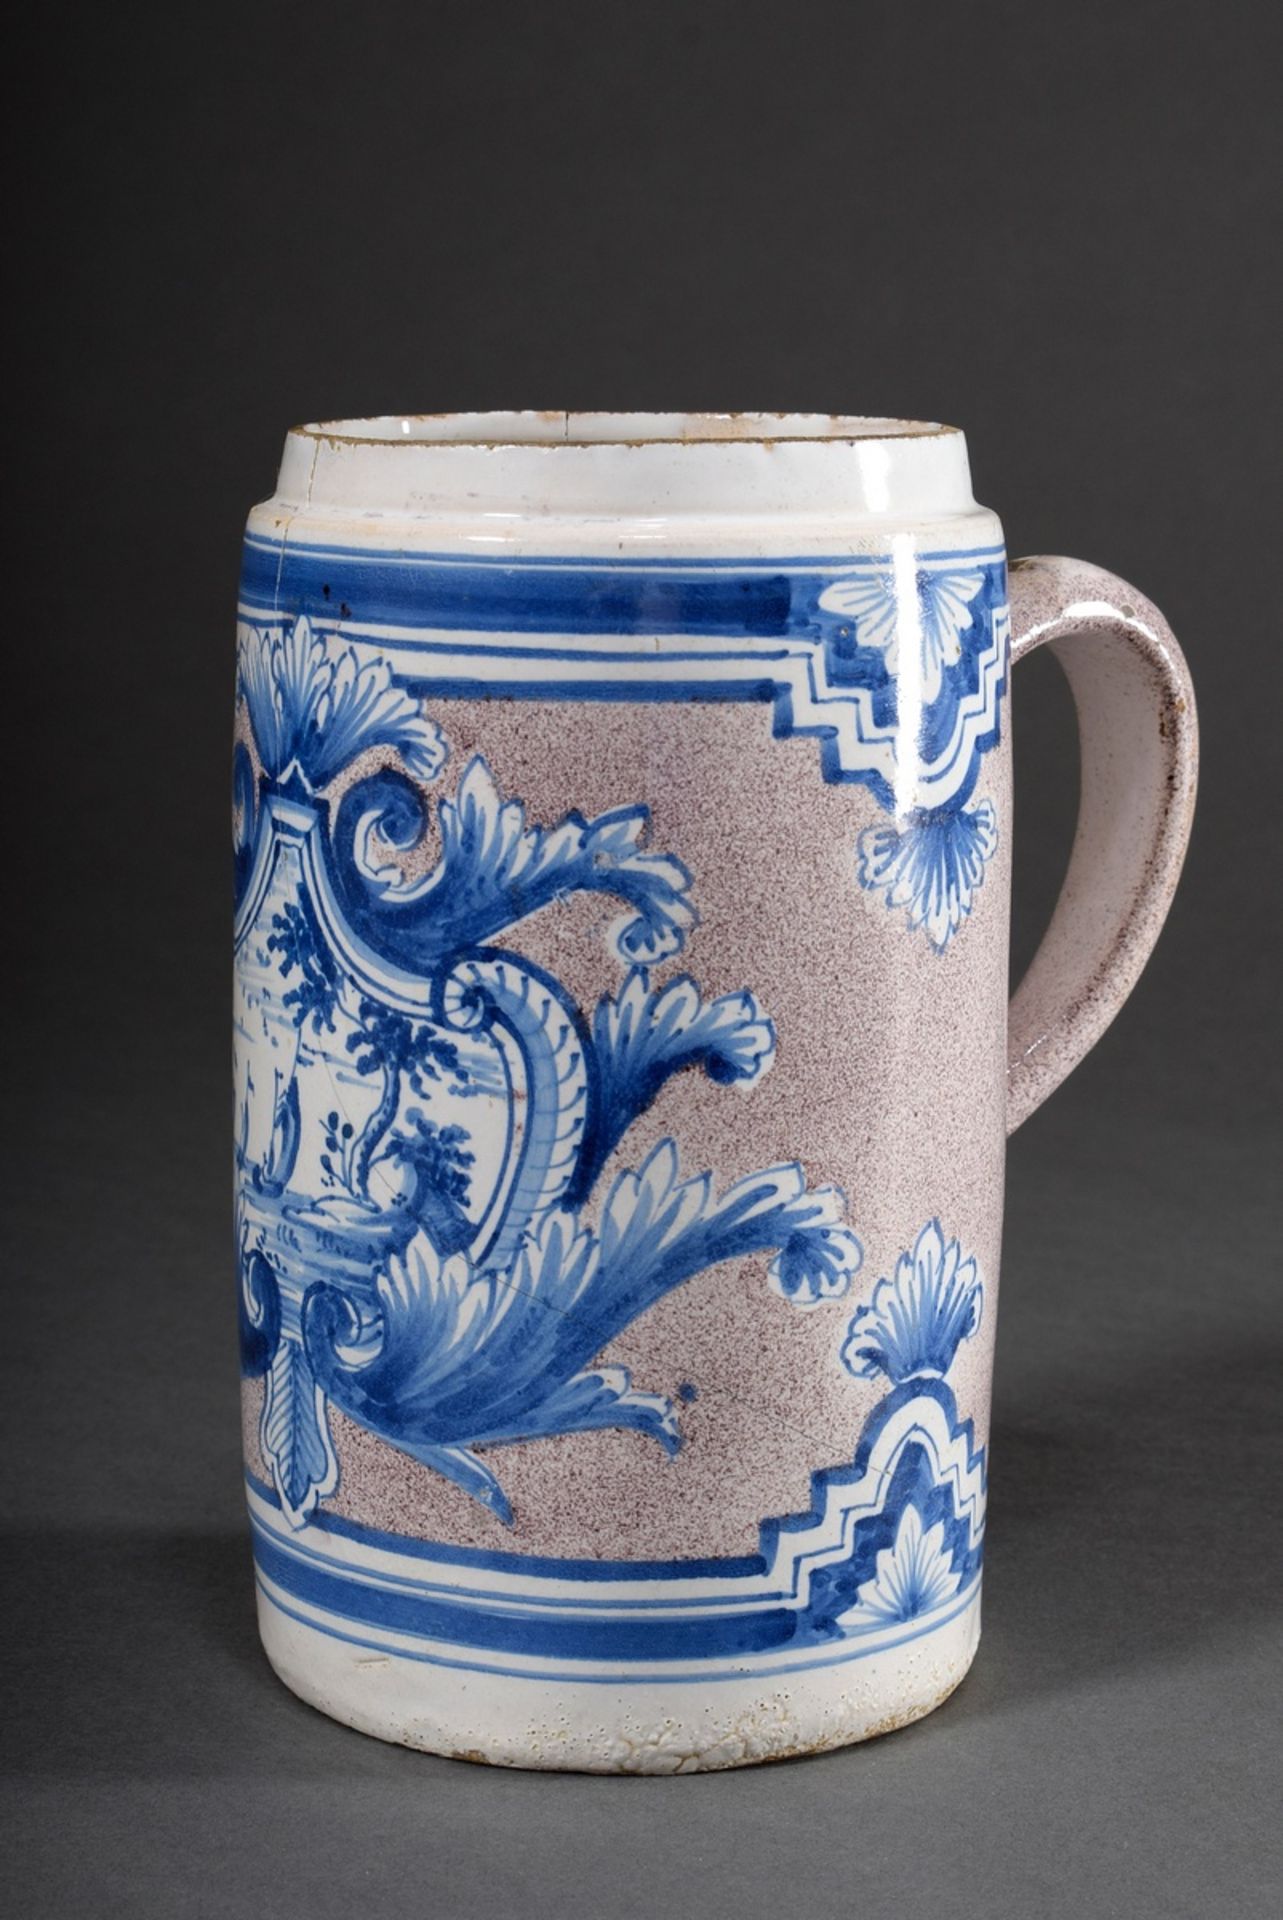 Faience cylindrical jug with blue painting decor "Sailboats in front of the coast" in floral cartou